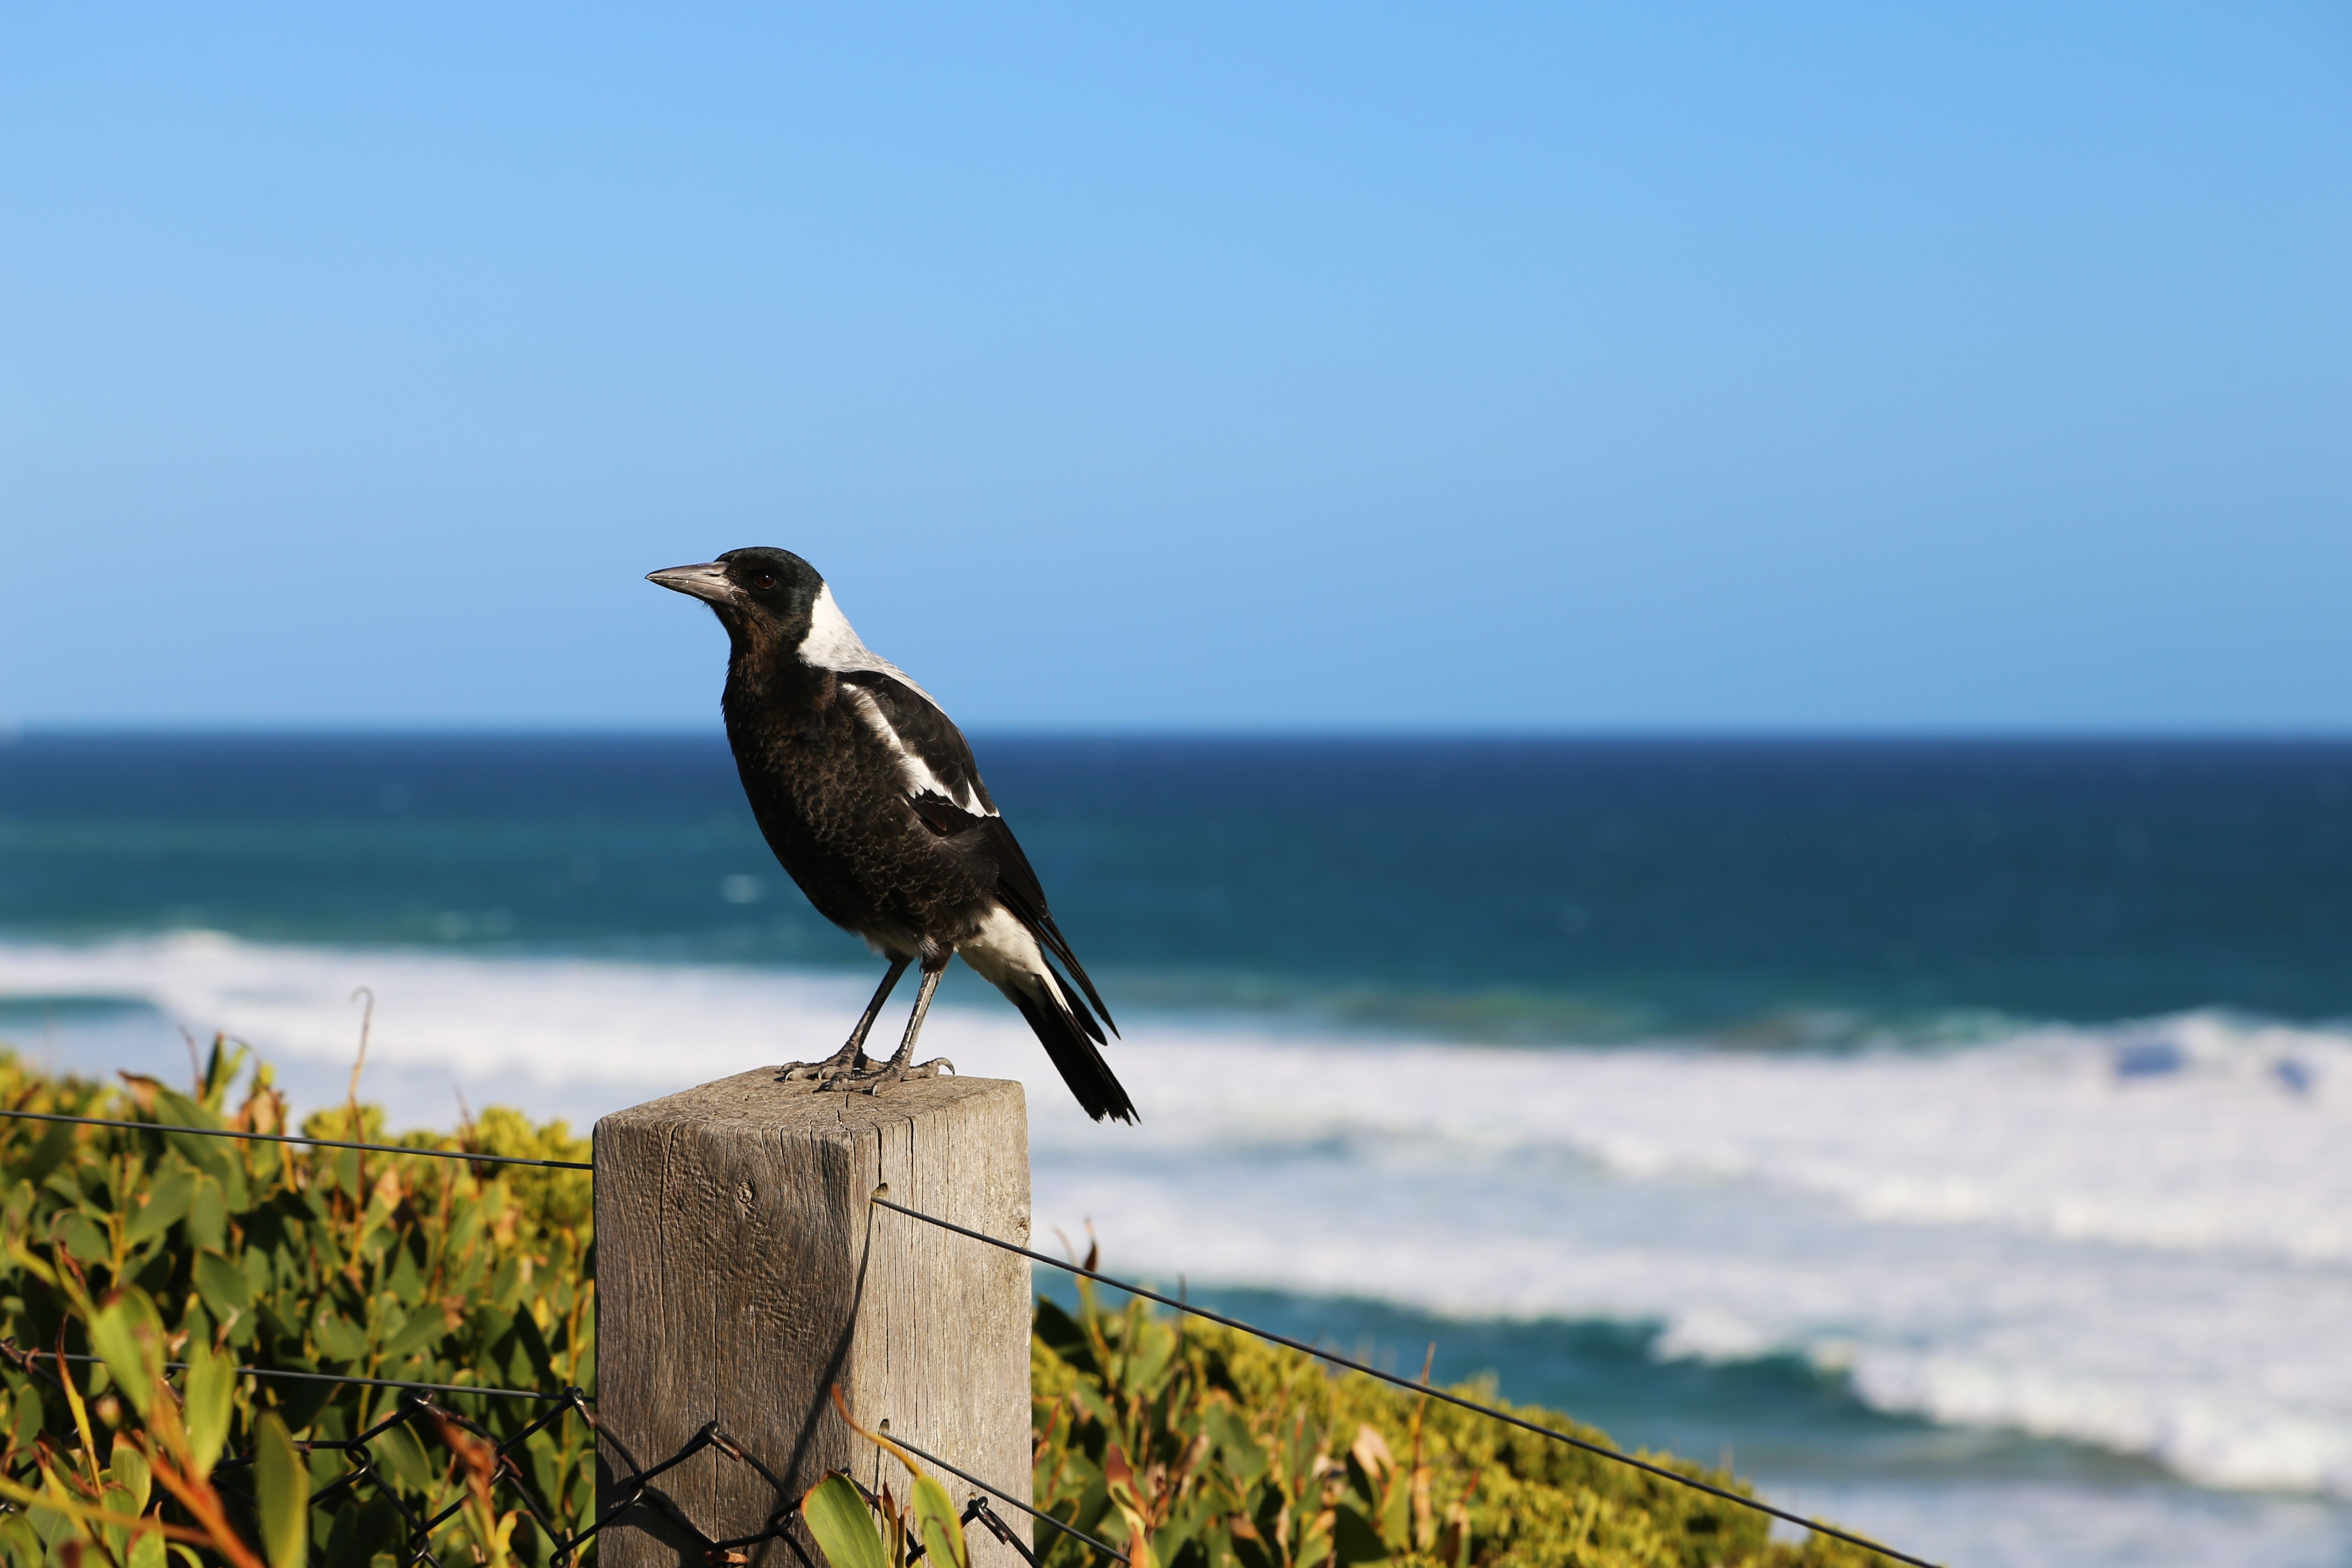 white and black bird on brown wooden panel near the body of water